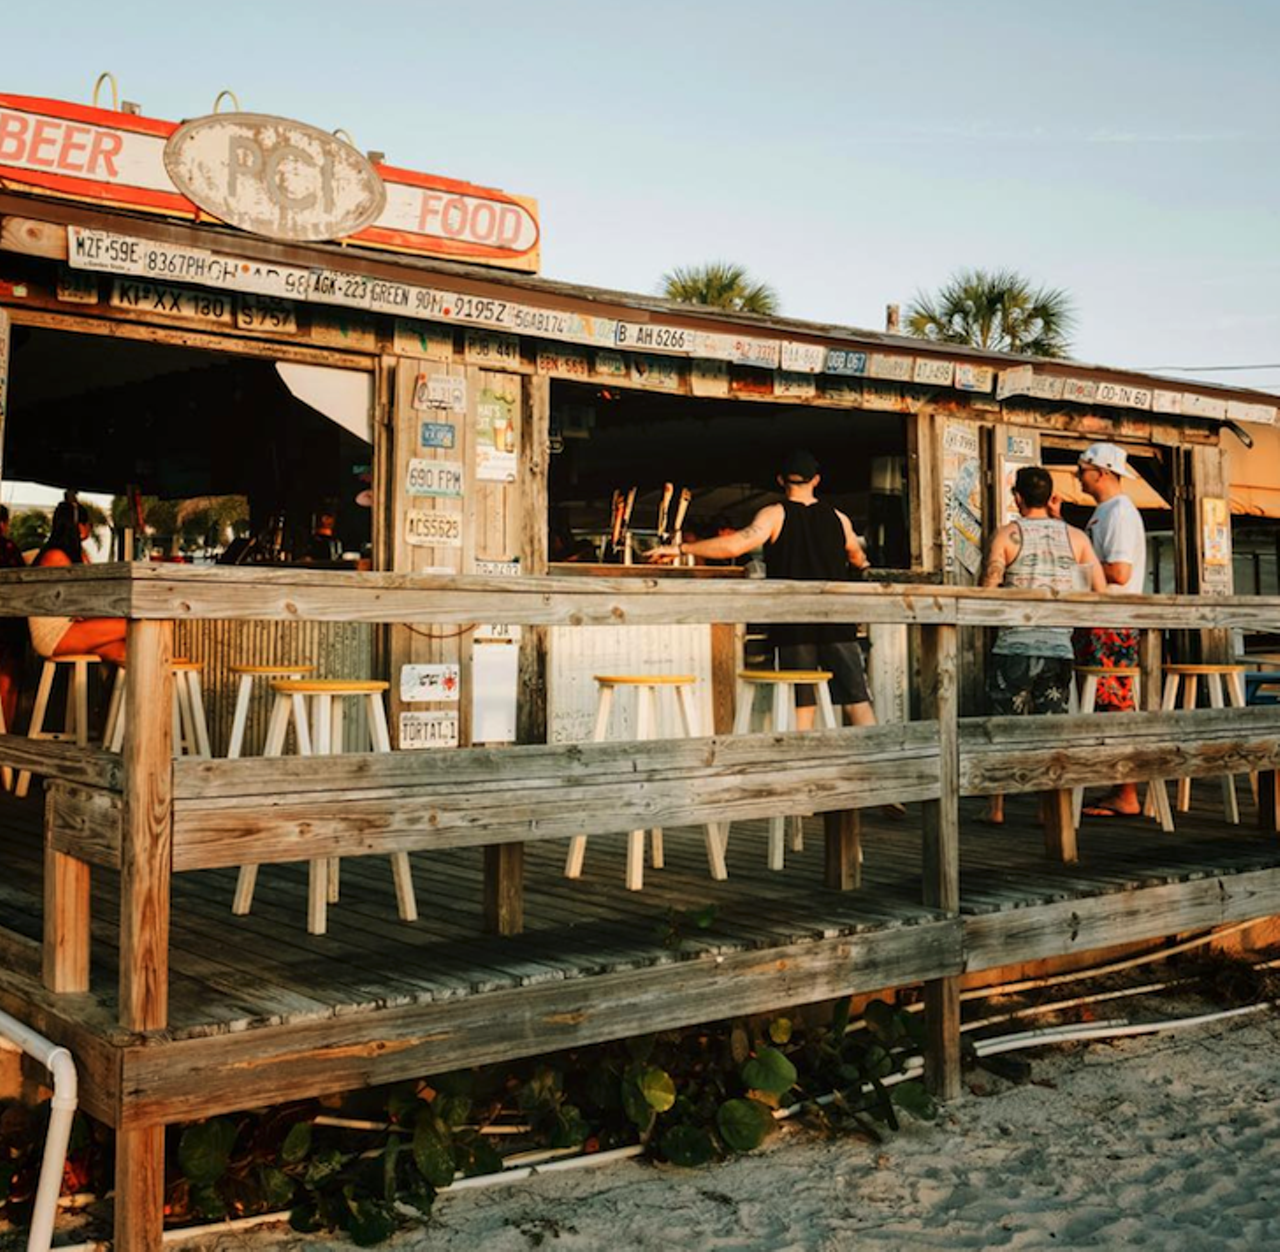 PCI Beach Bar and Snack Shack
6300 Gulf Blvd., St. Pete Beach. 727-367-2711
Postcard Inn’s seaside shack takes real estate at the local favorite St. Pete Beach, but if it gets too crowded you can take your order of black and bleu chips and black raspberry gingerita poolside.
Photo via Postcard Inn on the Beach/Facebook